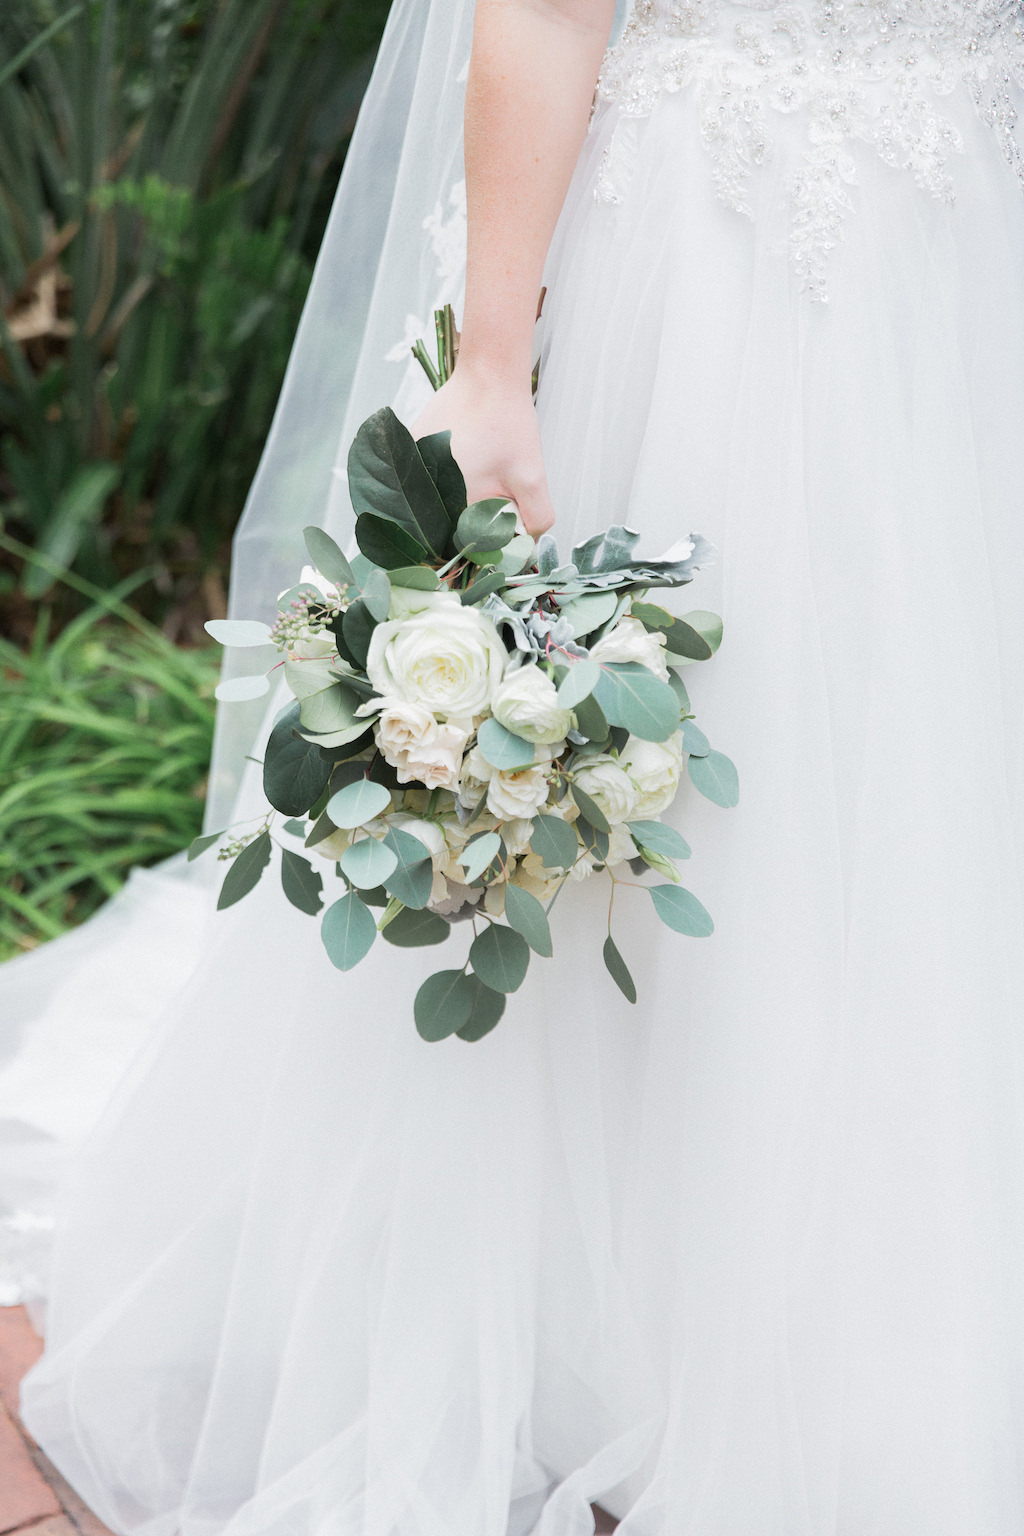 Outdoor Bridal Portrait with White Rose and Greenery Bouquet